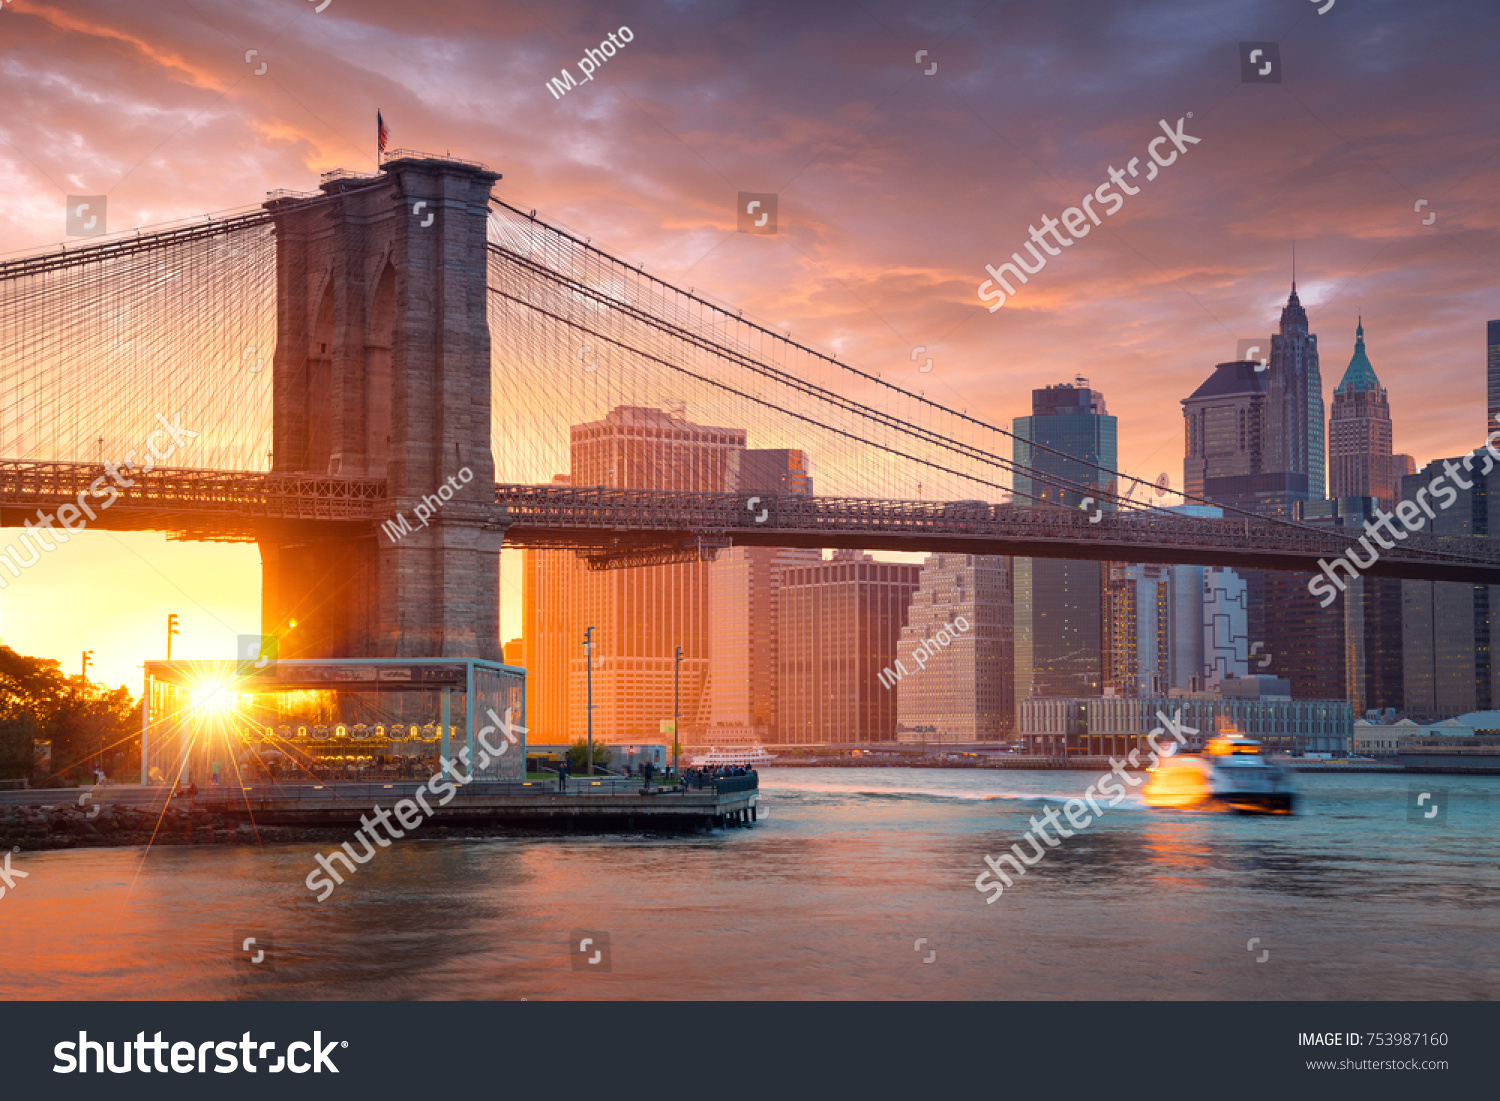 Famous Brooklyn Bridge in New York City with financial district - downtown Manhattan in background. Sightseeing boat on the East River and beautiful sunset over Jane's Carousel. #753987160